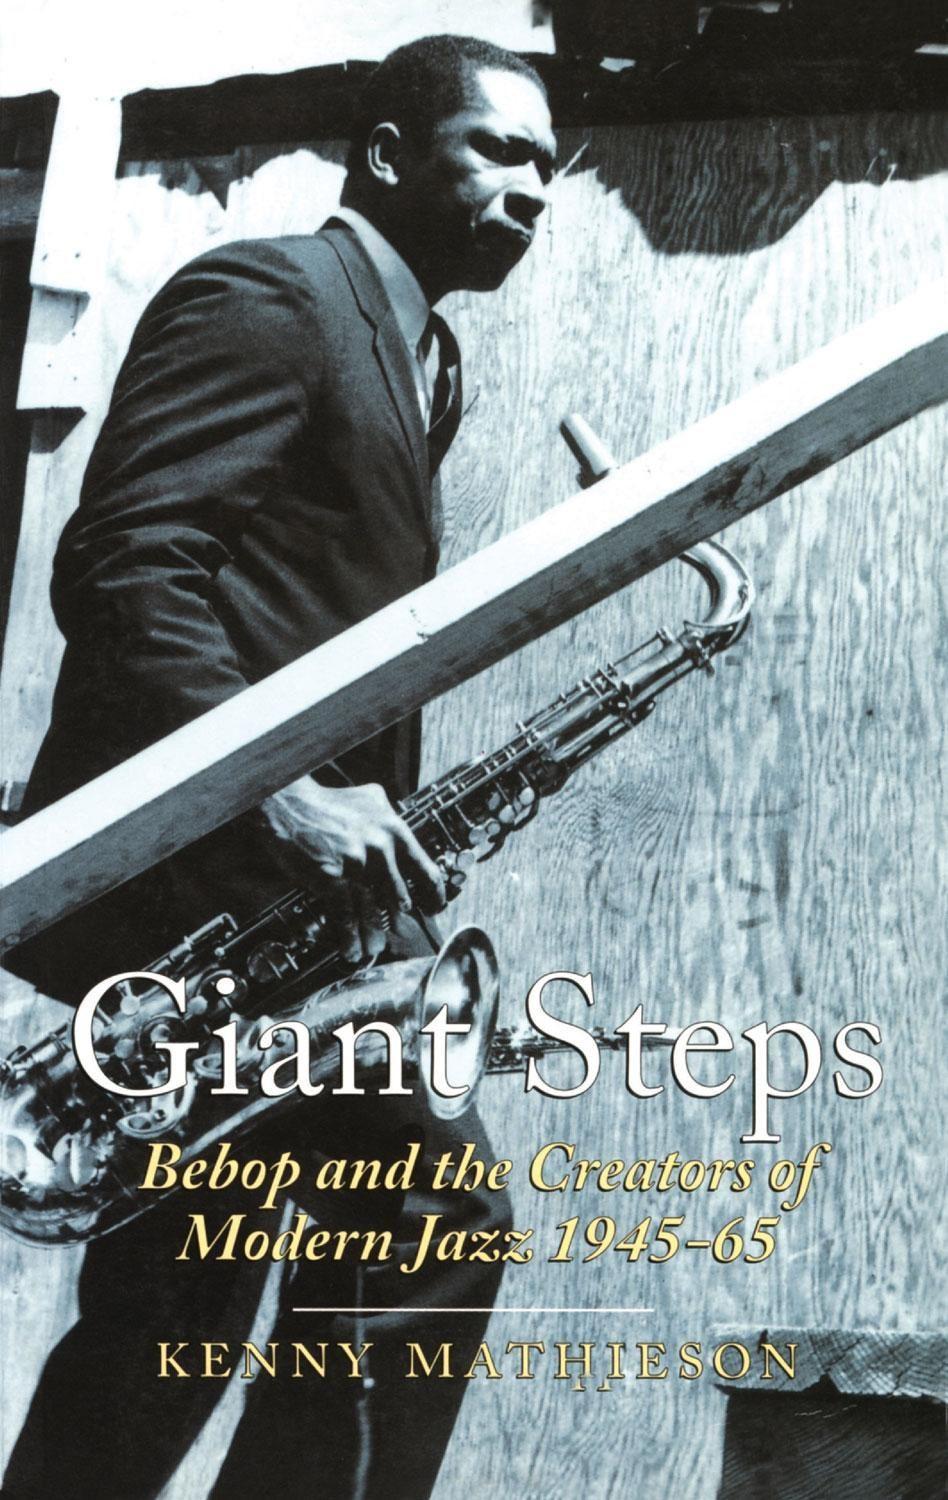 Giant Steps: Bebop And The Creators Of Modern Jazz, 1945-65 - Mathieson, Kenny